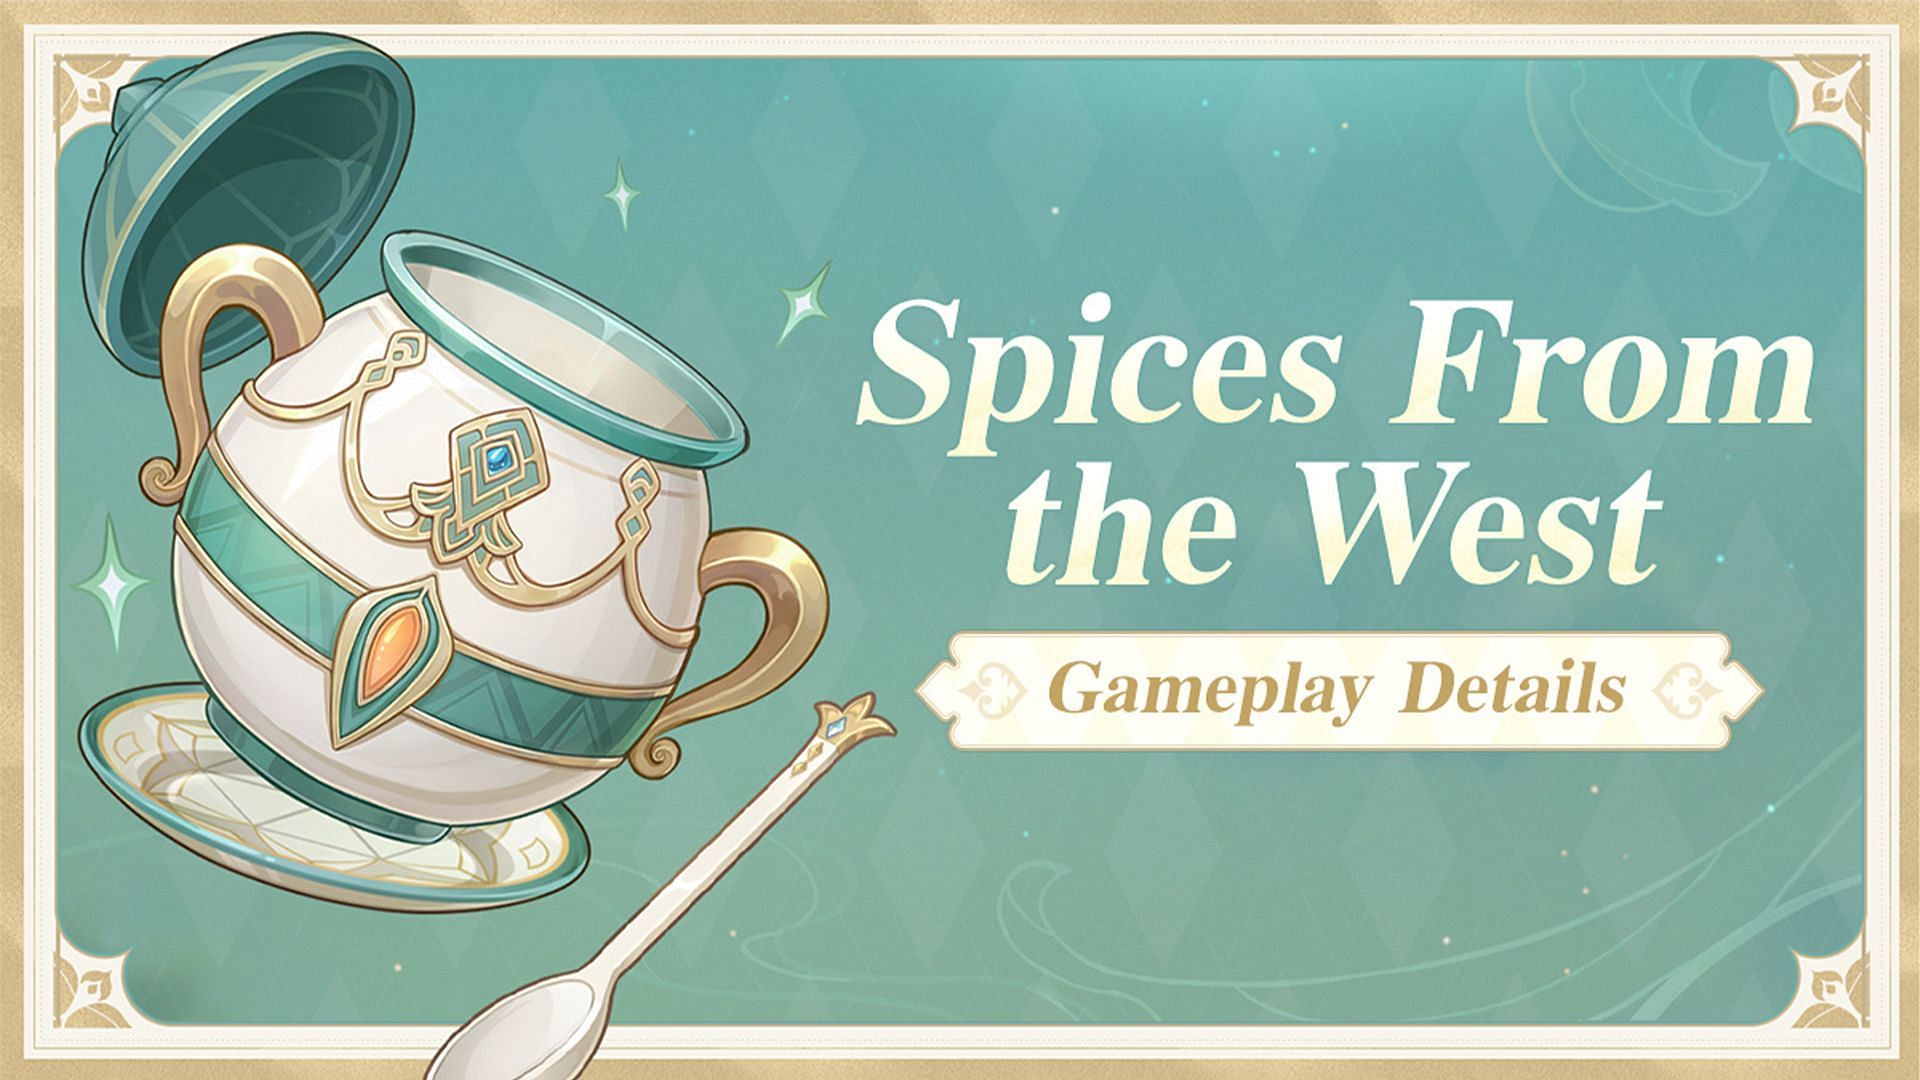 Spices From the West event (Image via HoYoverse)